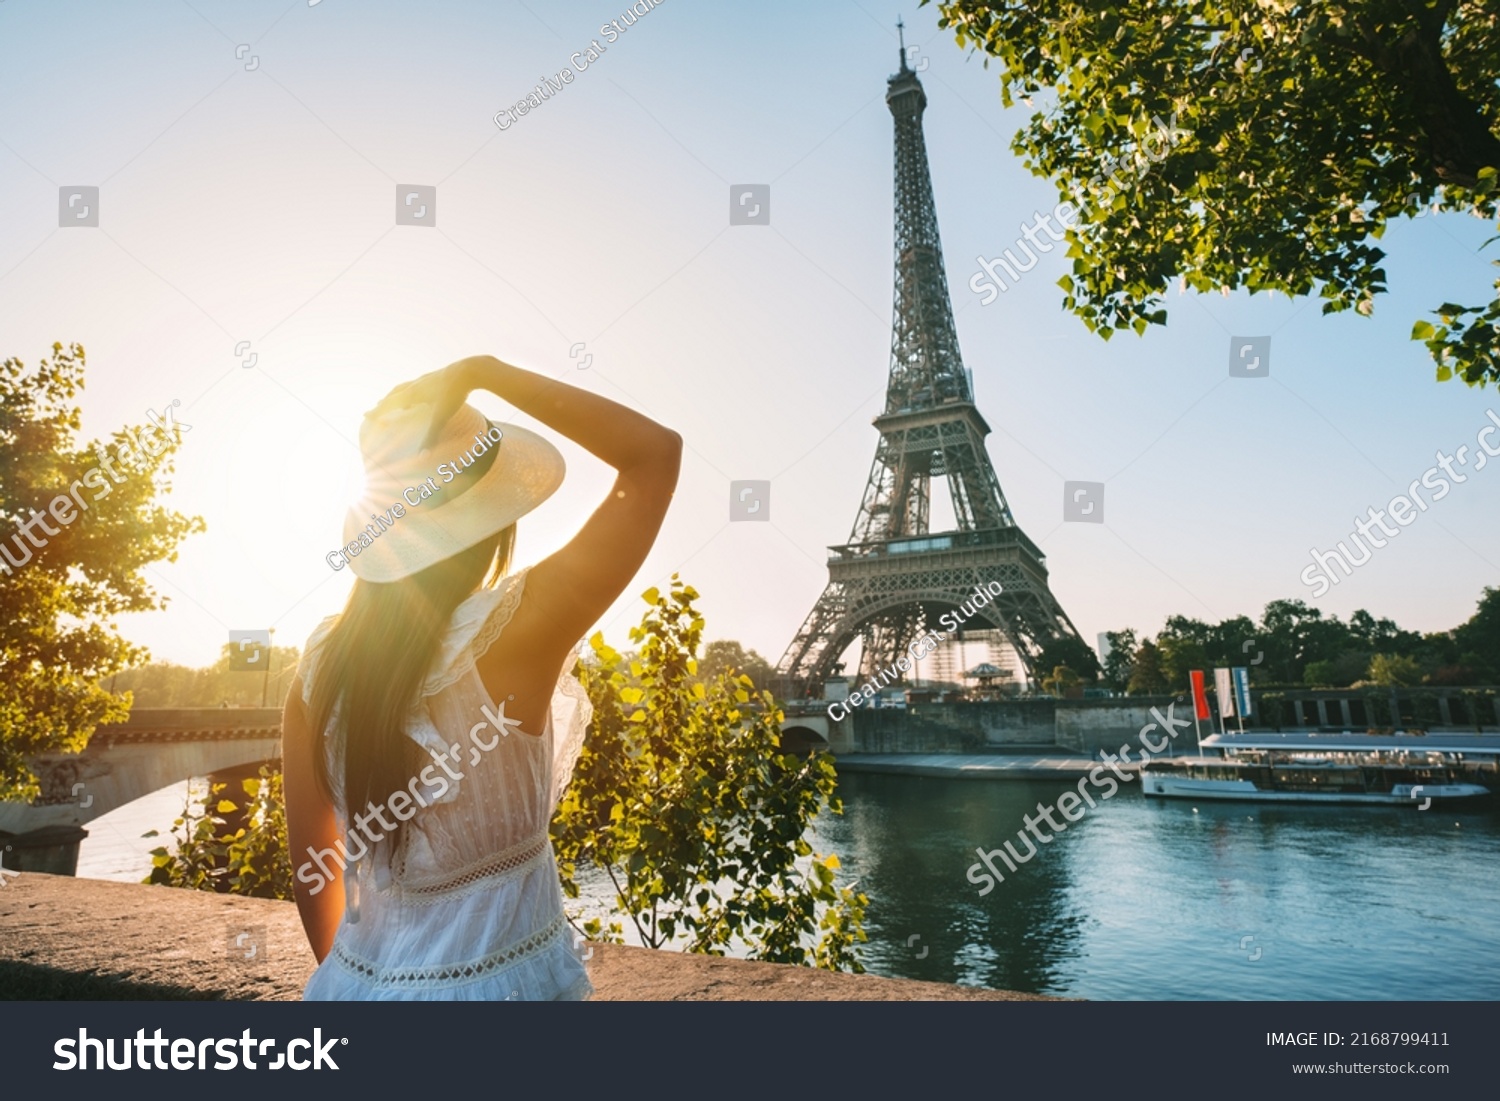 Young woman tourist in sun hat and white dress standing in front of Eiffel Tower in Paris at sunset. Travel in France, tourism concept #2168799411